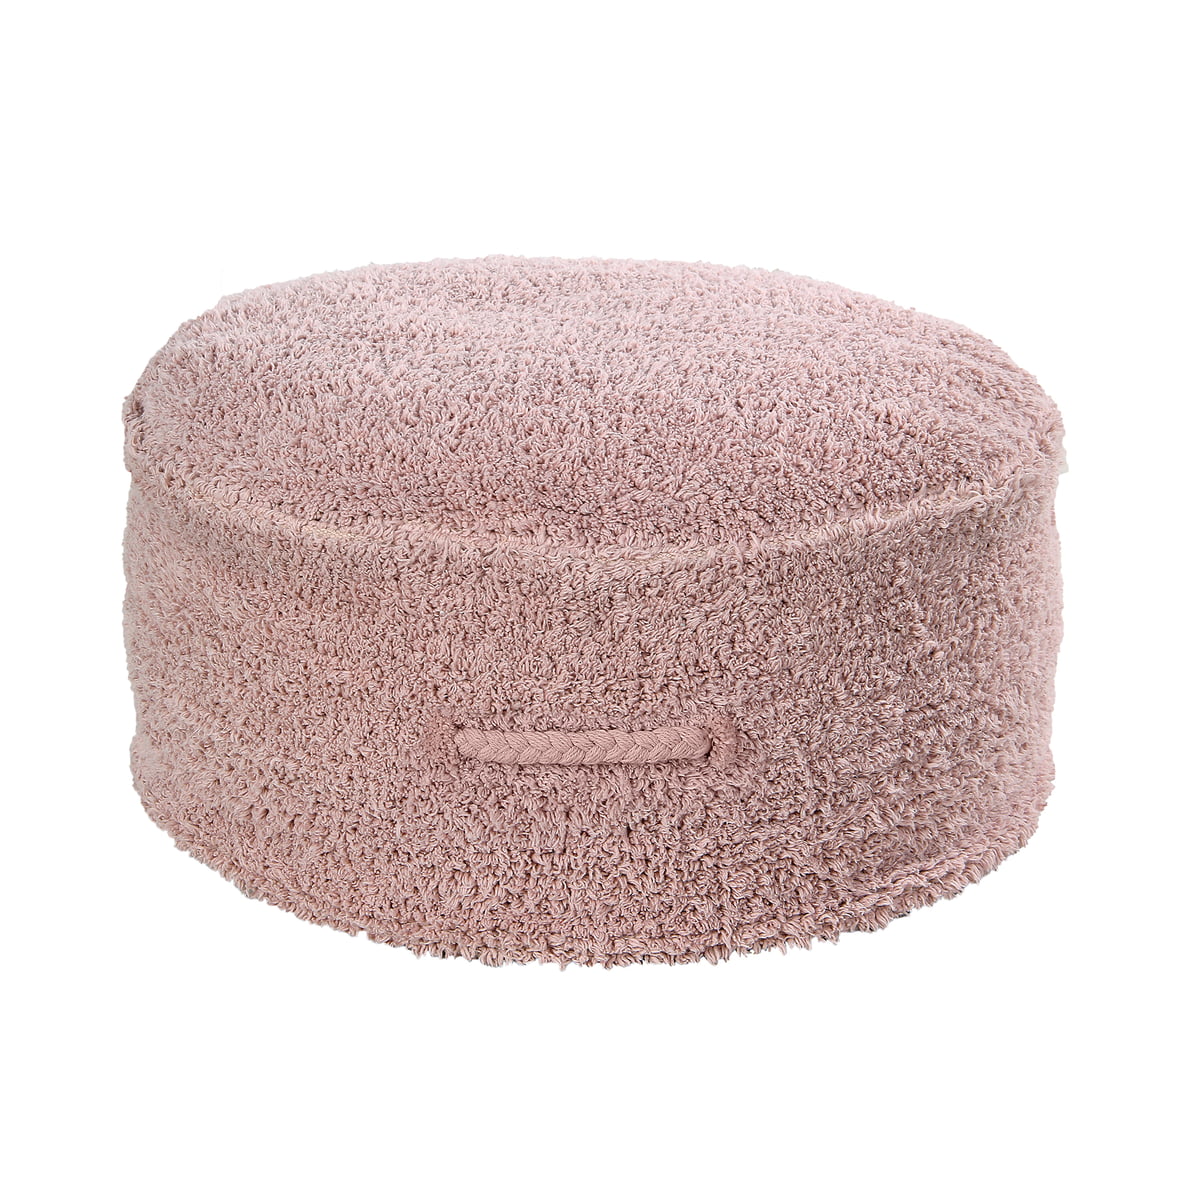 lorena canals - chill pouf, 50 x 50 cm, vintage nude